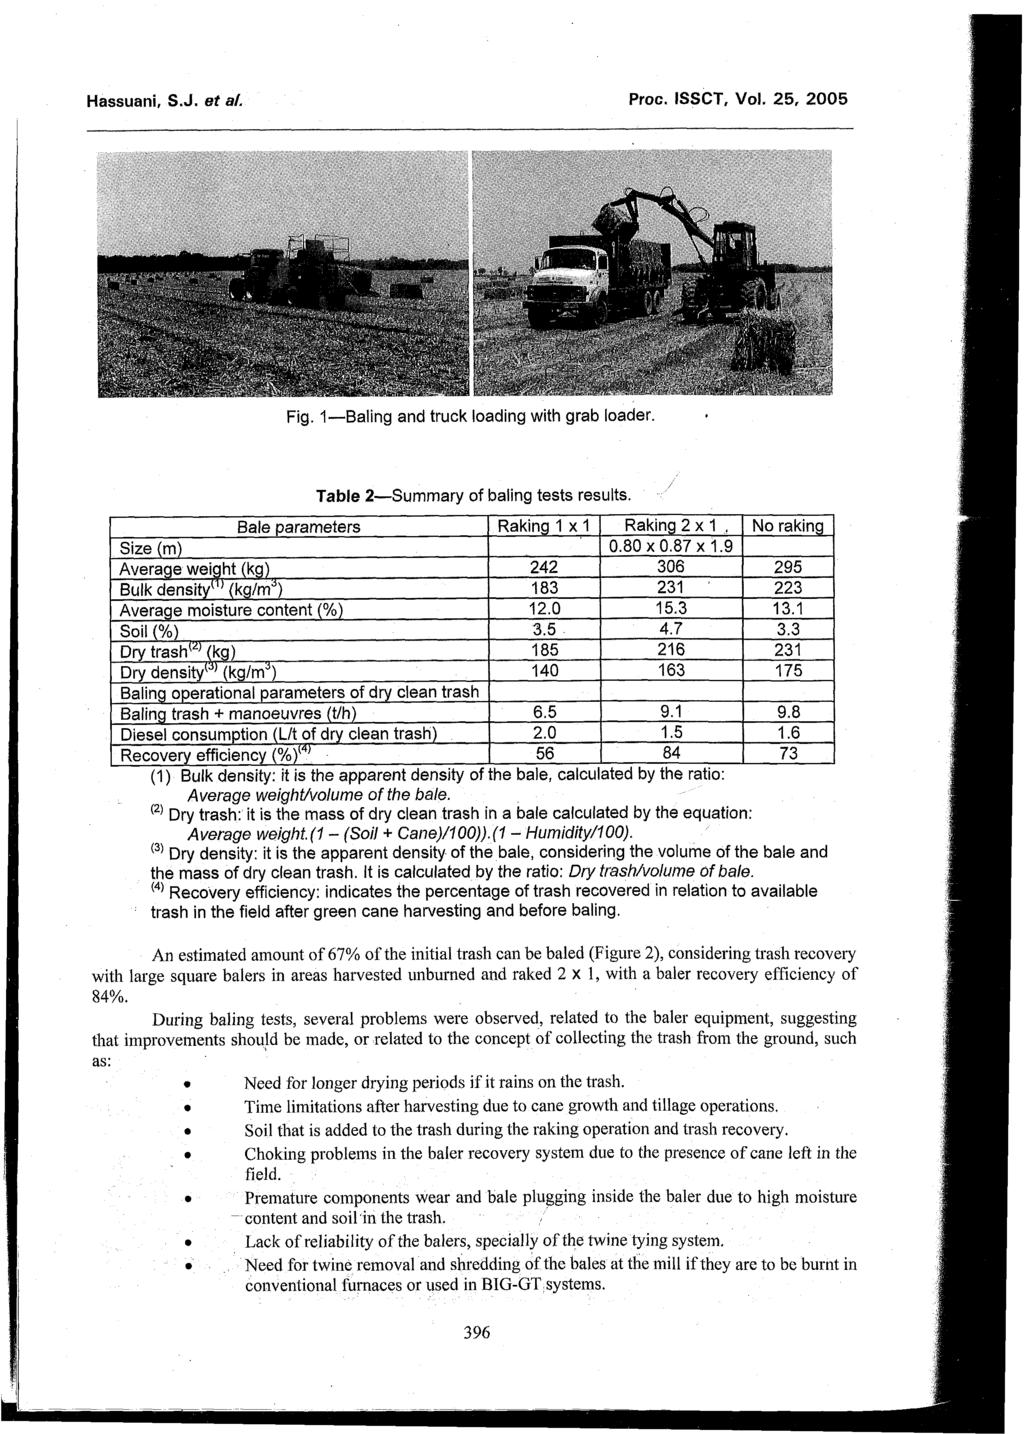 Hassuani, S.J. et a/. Proc. ISSCT, Vol. 25, 2005 Fig, I-Baling and truck loading with grab loader. Table 2-Summary of baling tests results.